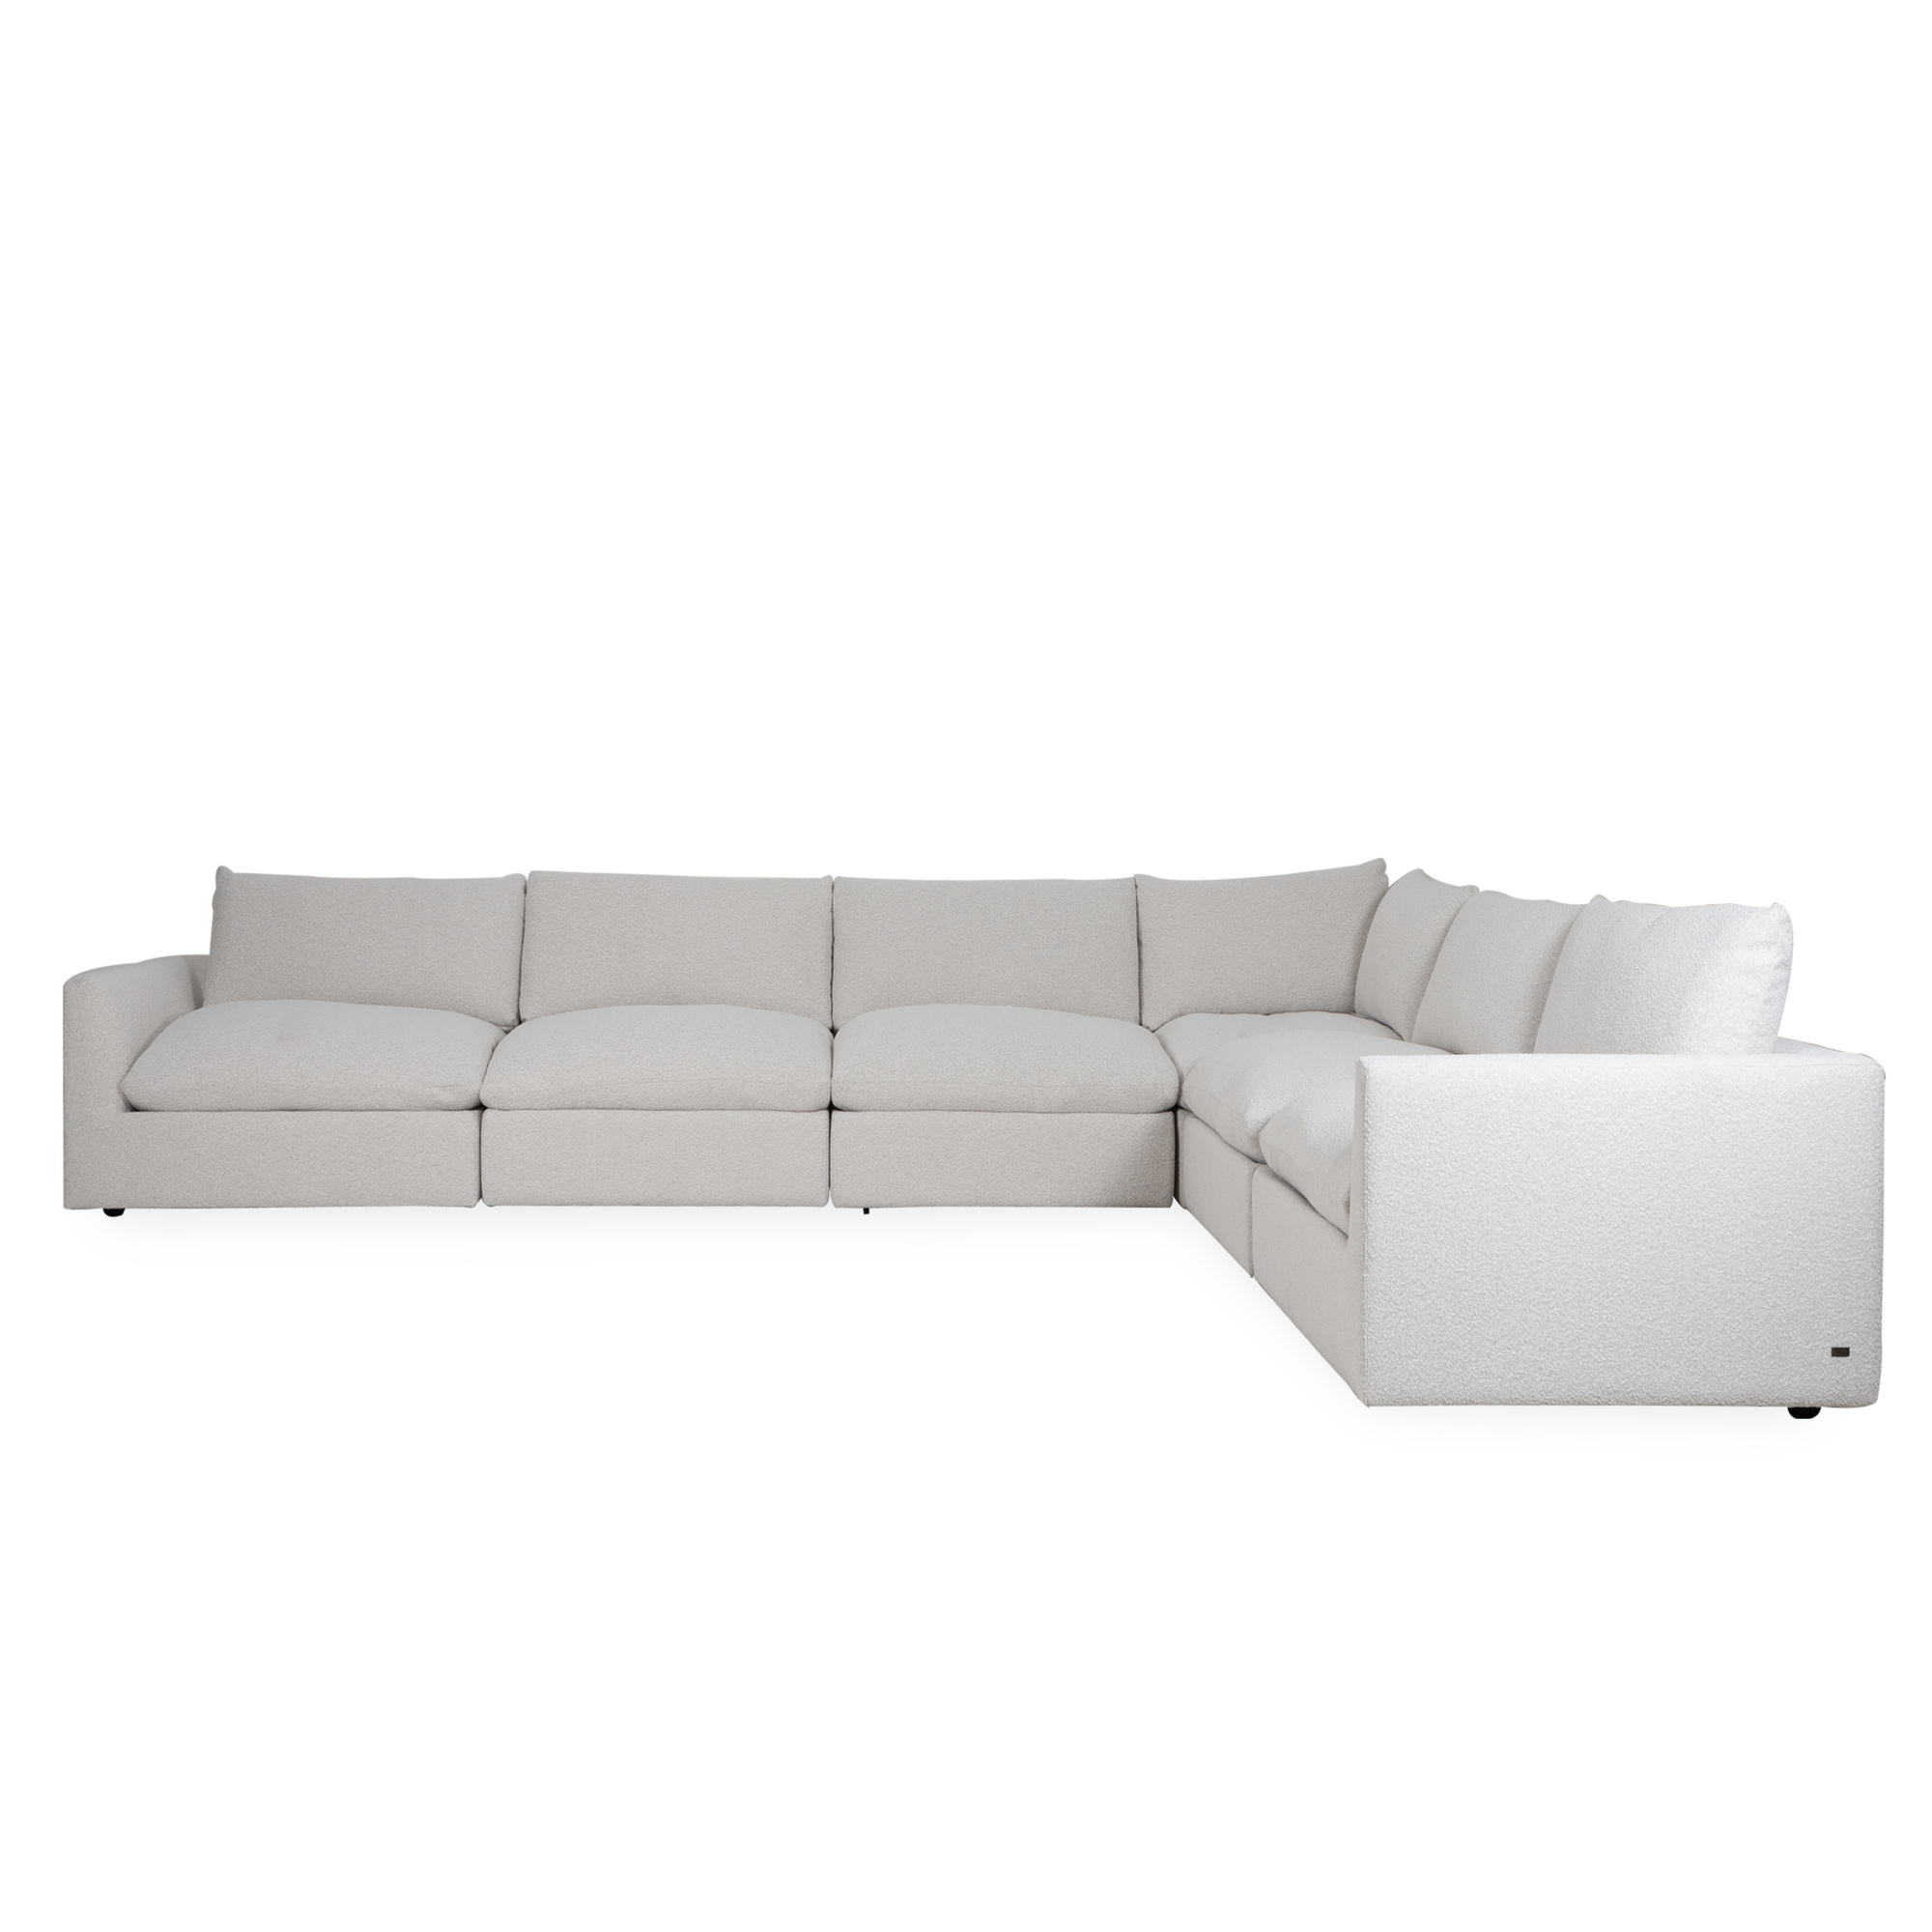 Elegant and ultra-versatile, the Espen Modular Sectional cocoons you in plush comfort.